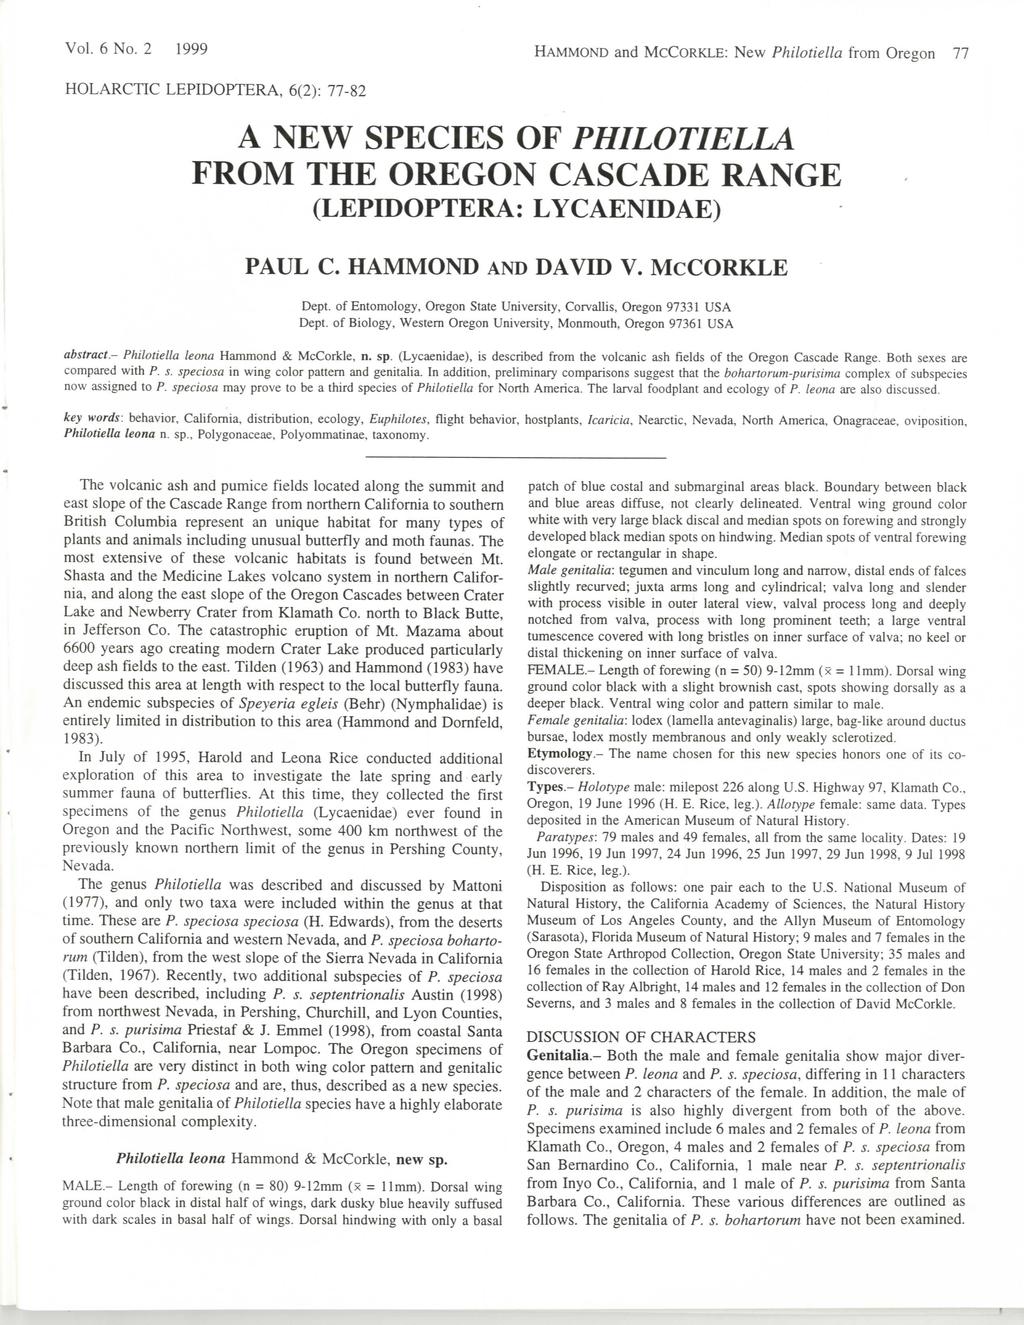 Vol. 6 No. 2 1999 HAMMOND and McCORKLE: New Philotiella from Oregon 77 HOLARCTIC LEPIDOPTERA, 6(2): 77-82 A NEW SPECIES OF PHILOTIELLA FROM THE OREGON CASCADE RANGE (LEPIDOPTERA: LYCAENIDAE) PAUL C.